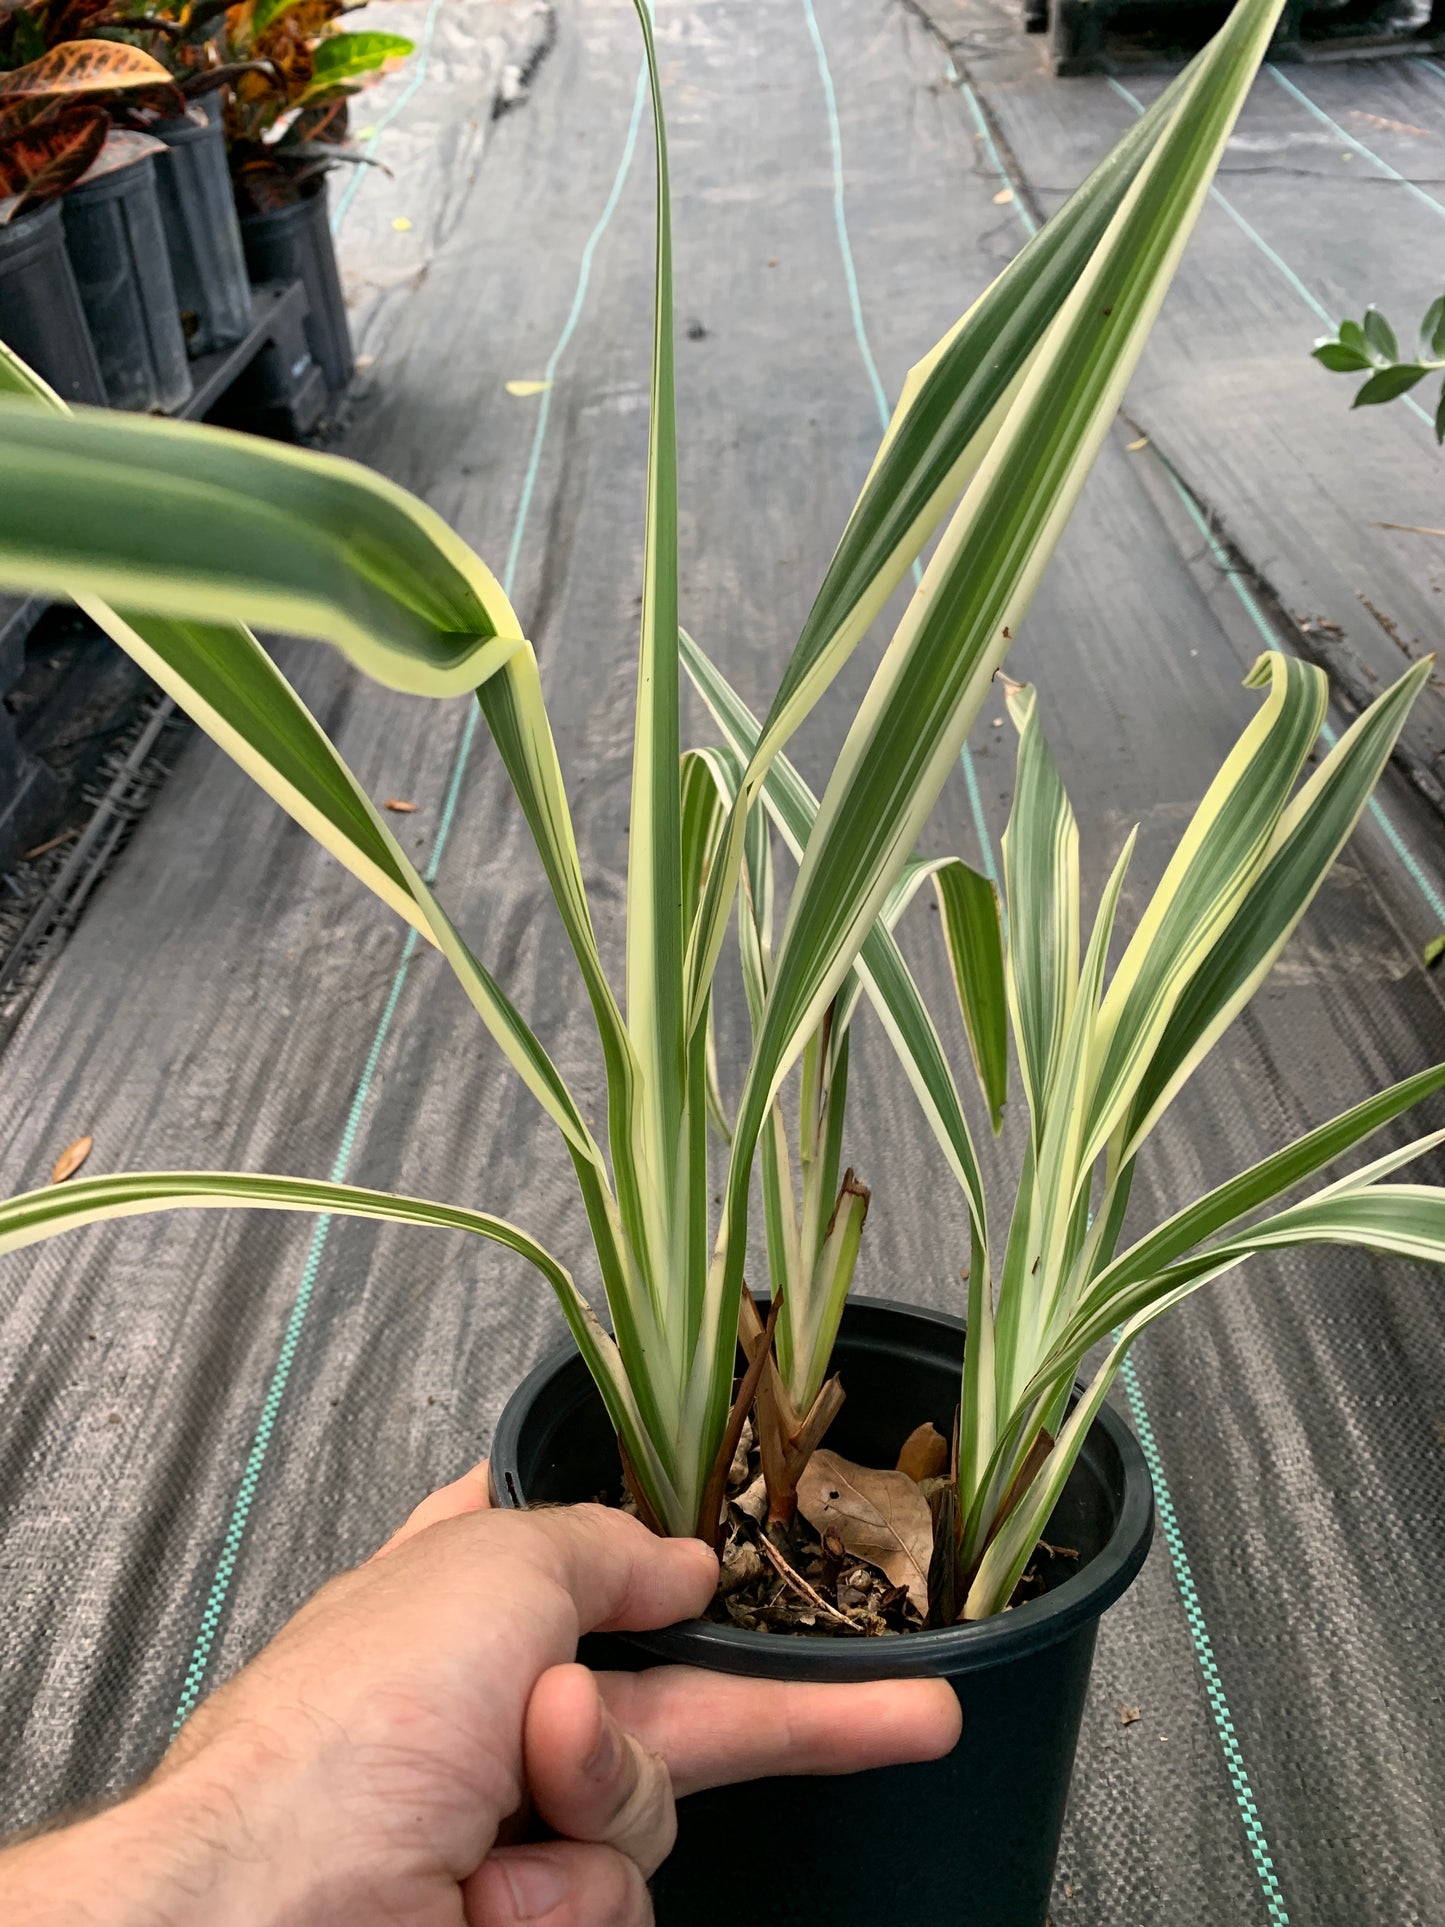 Variegated Flax Lily 1 gallon